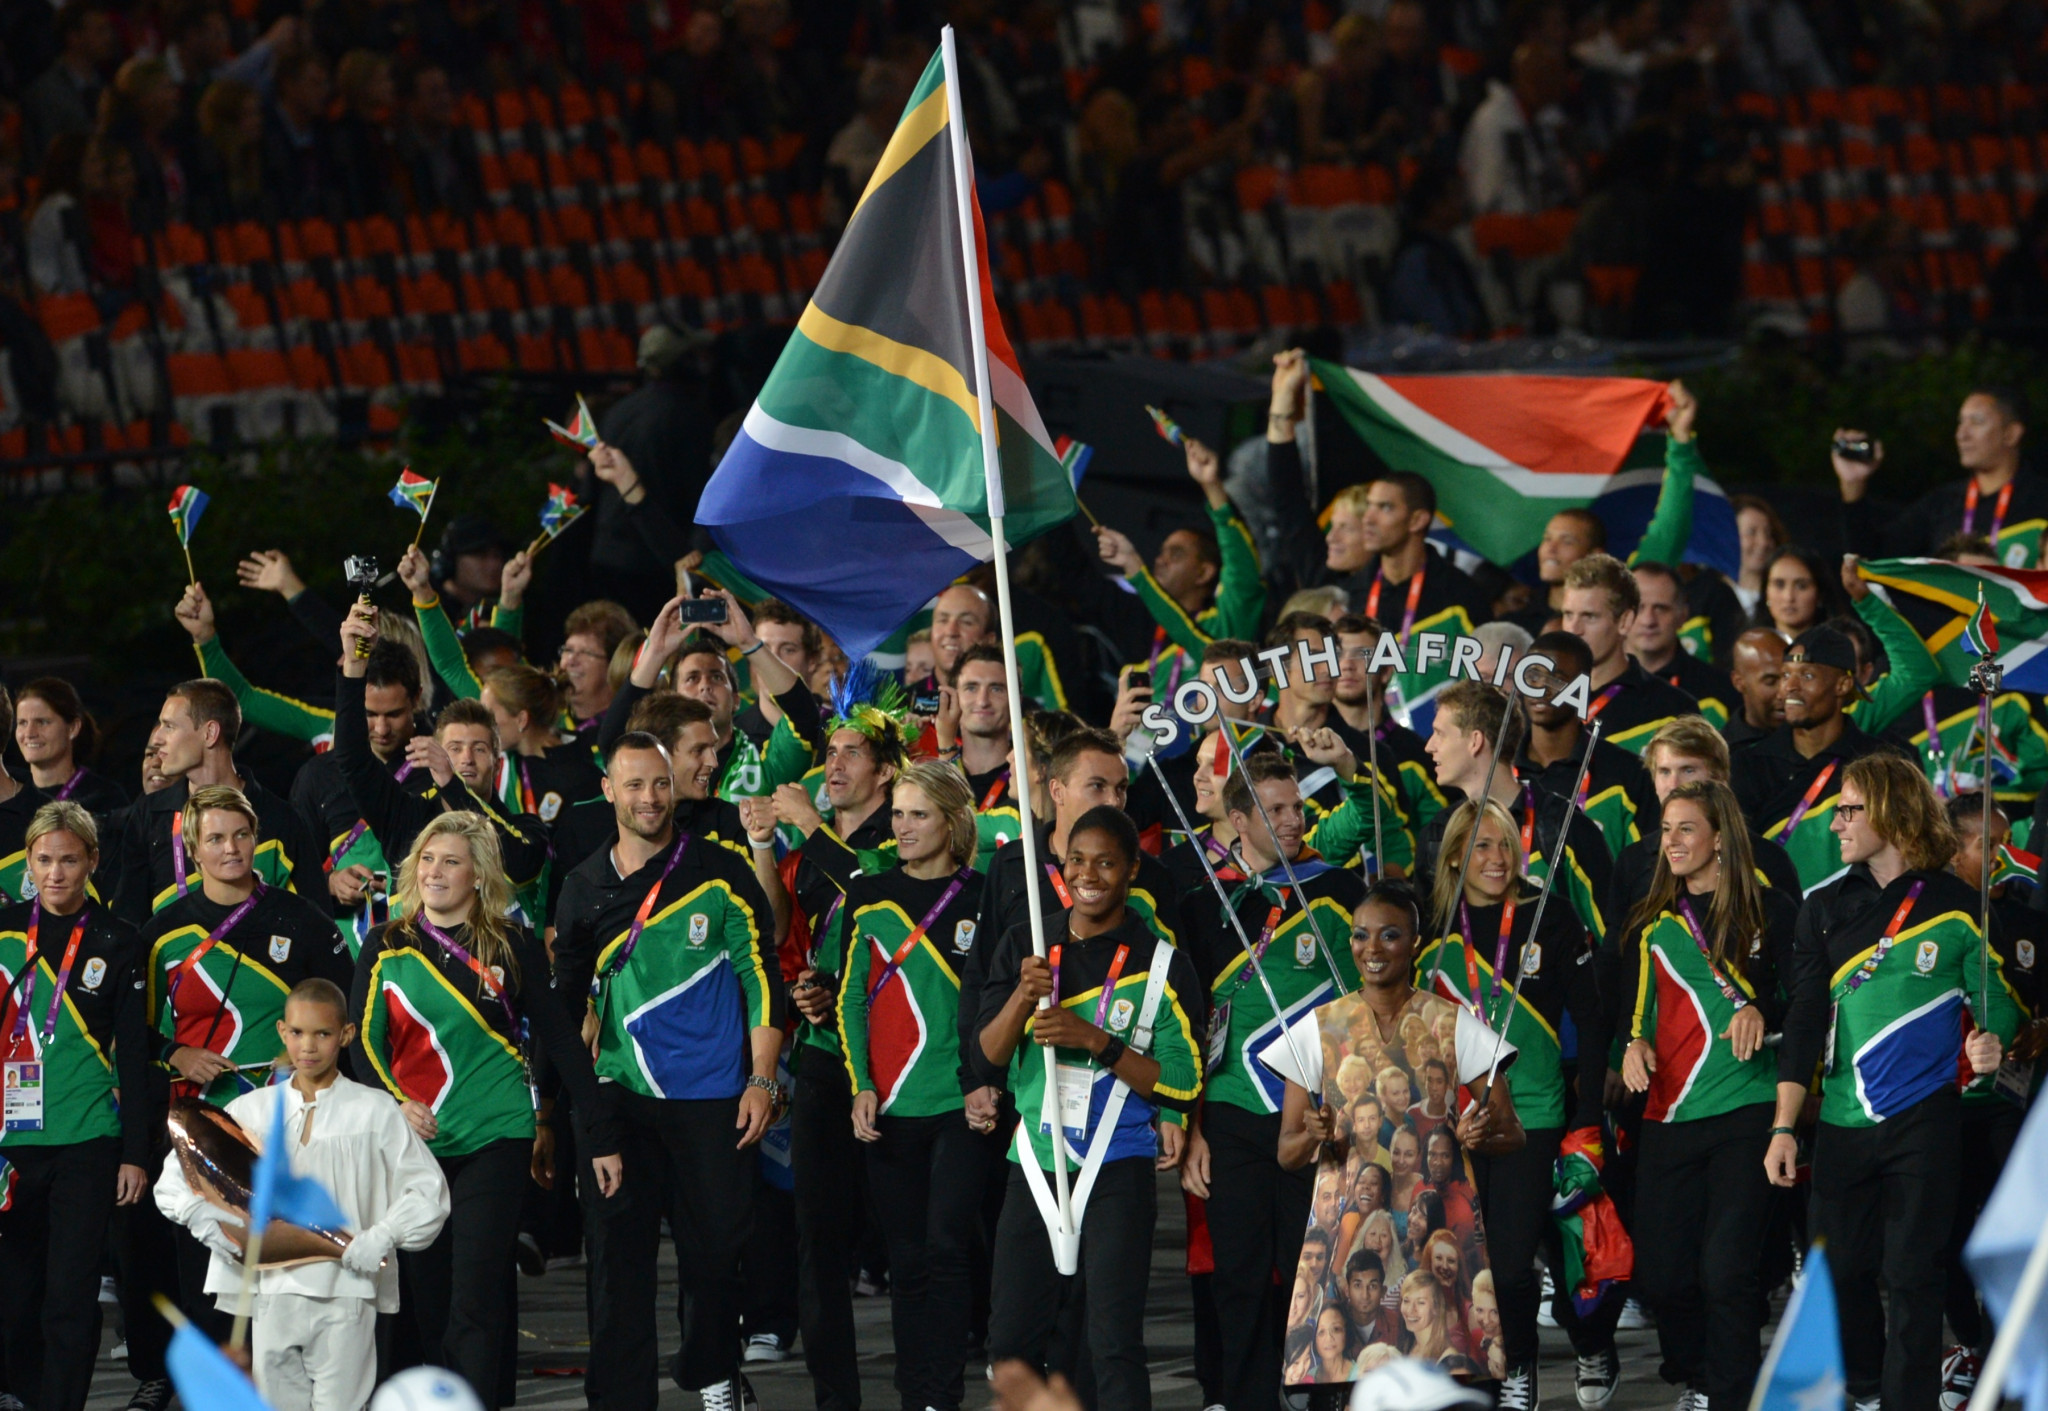 Caster Semenya carried South Africa's flag at the Opening Ceremony of the 2012 Olympic Games in London ©Getty Images